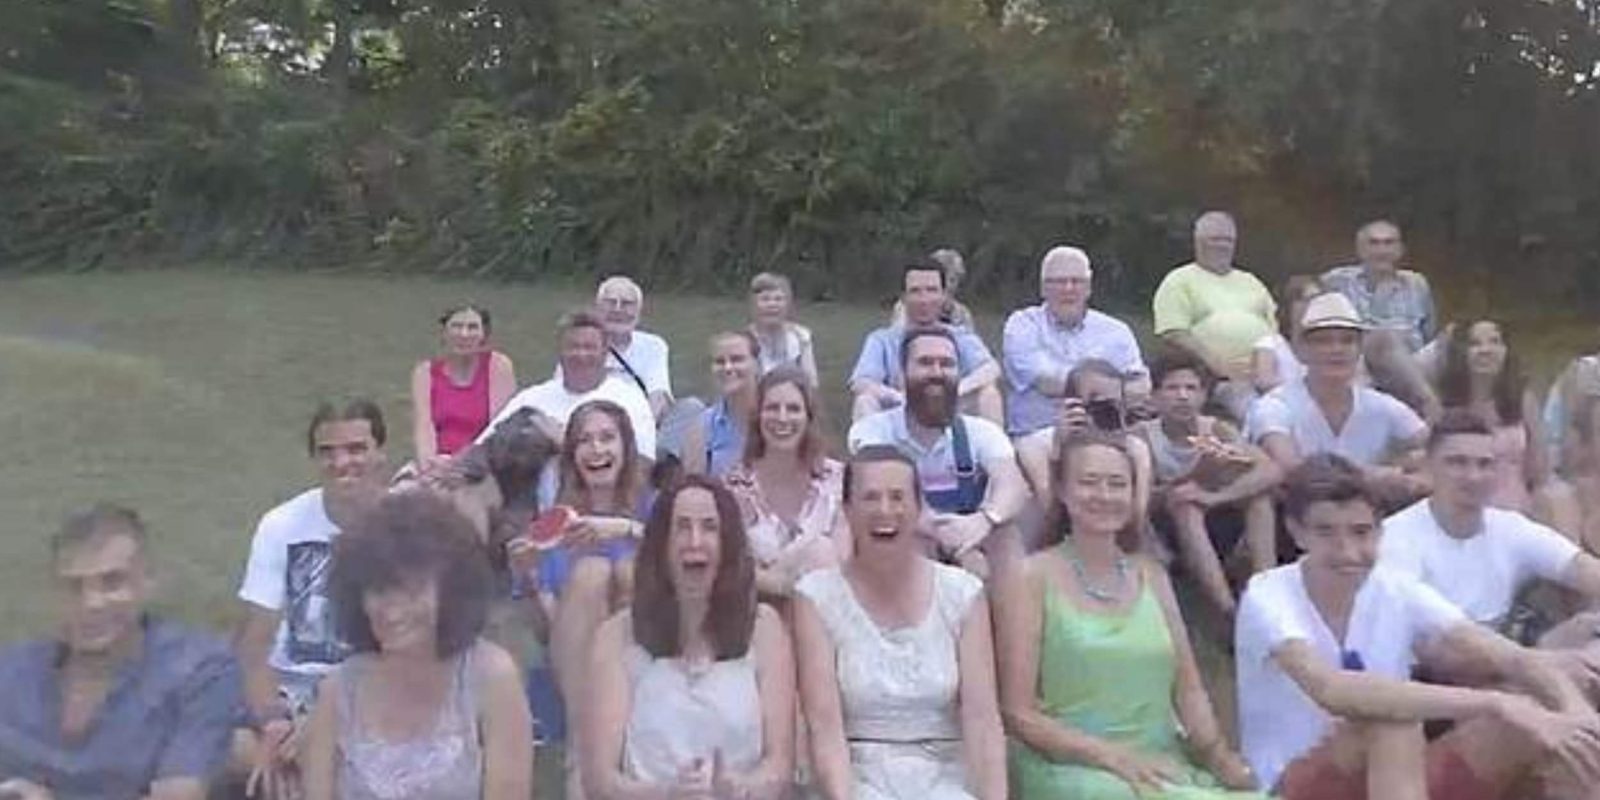 Drone flies into woman's face during family reunion